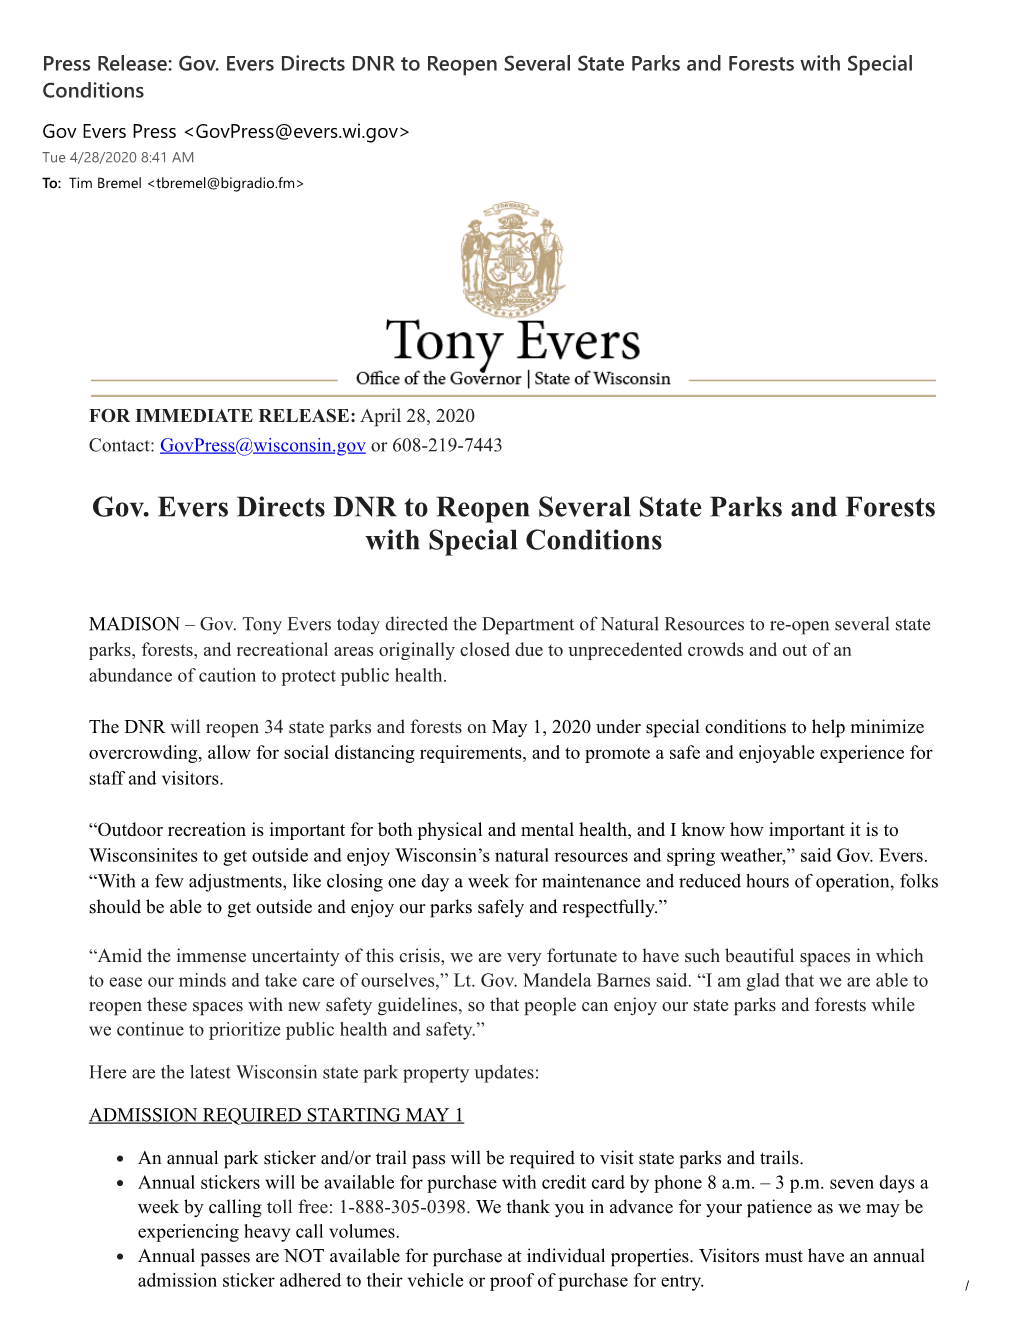 Gov. Evers Directs DNR to Reopen Several State Parks and Forests with Special Conditions